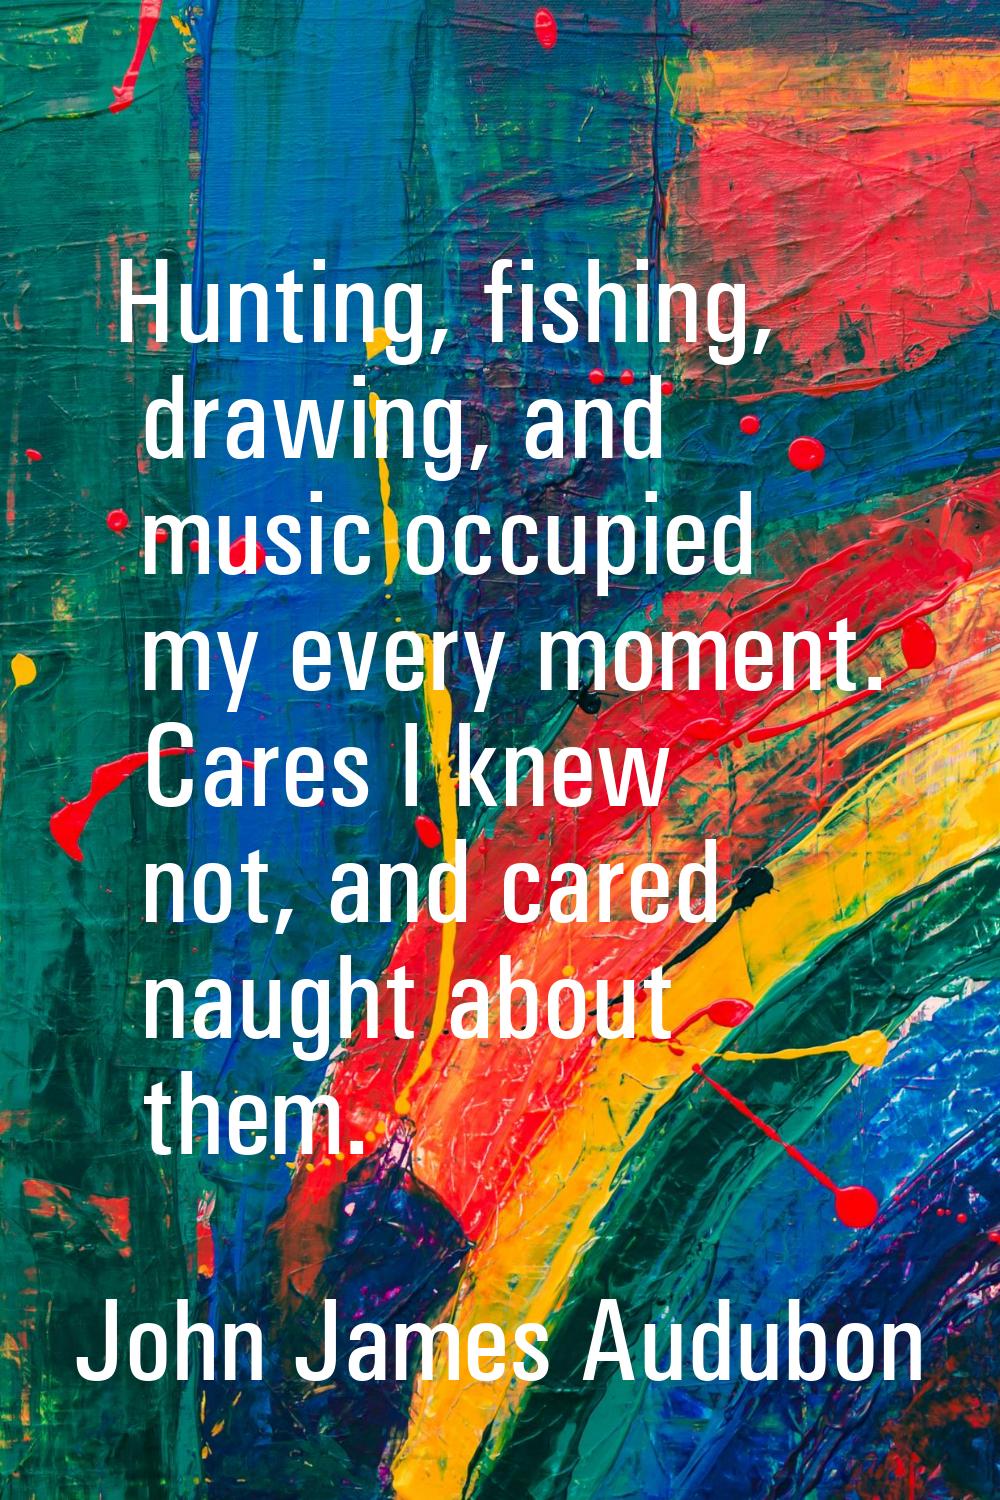 Hunting, fishing, drawing, and music occupied my every moment. Cares I knew not, and cared naught a